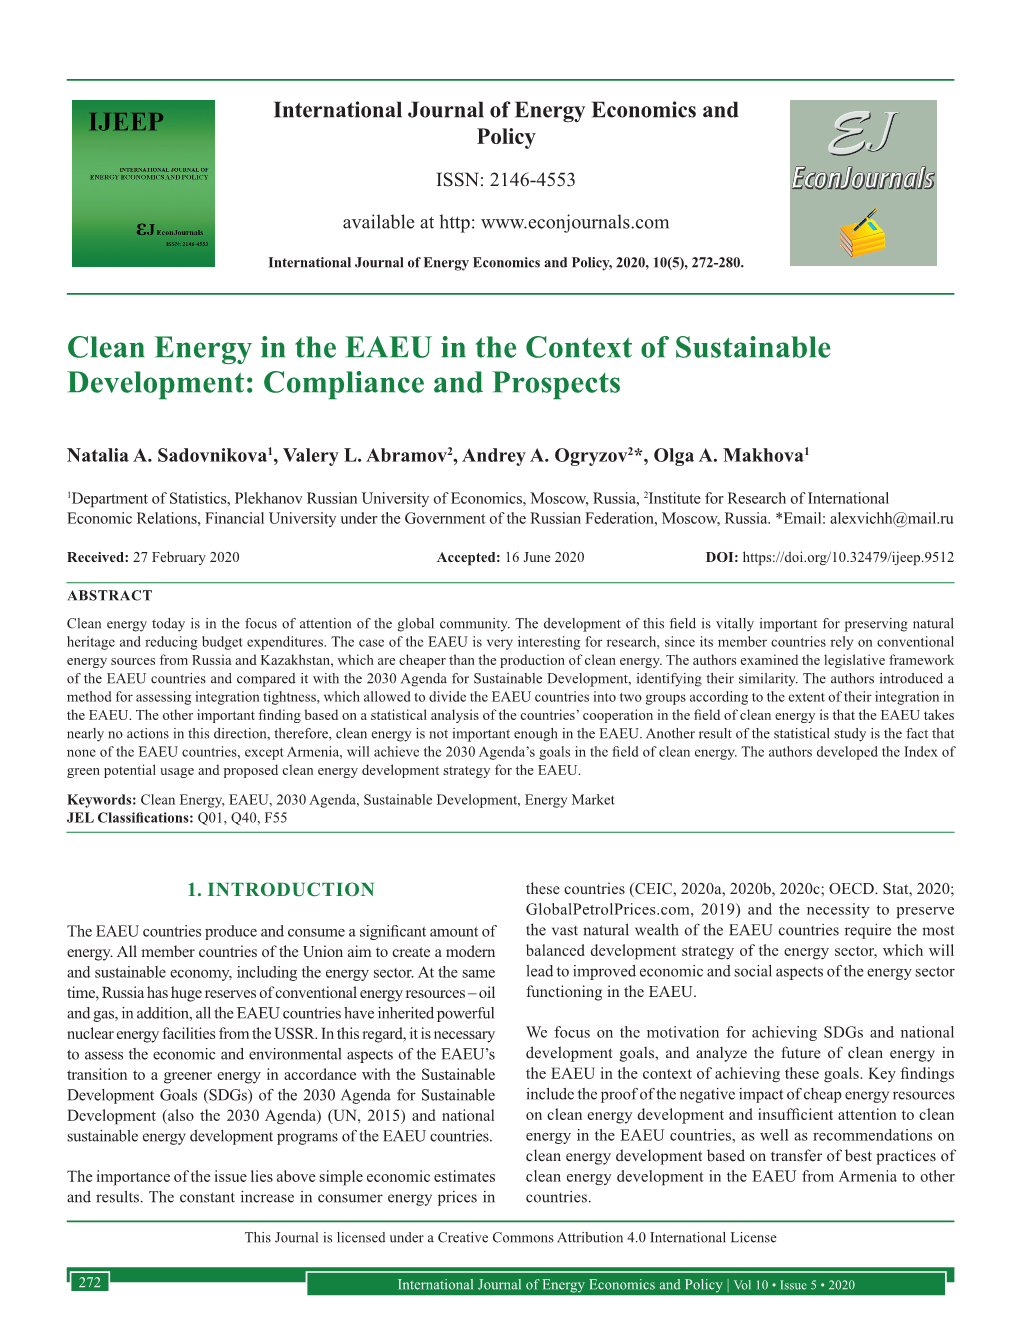 Clean Energy in the EAEU in the Context of Sustainable Development: Compliance and Prospects